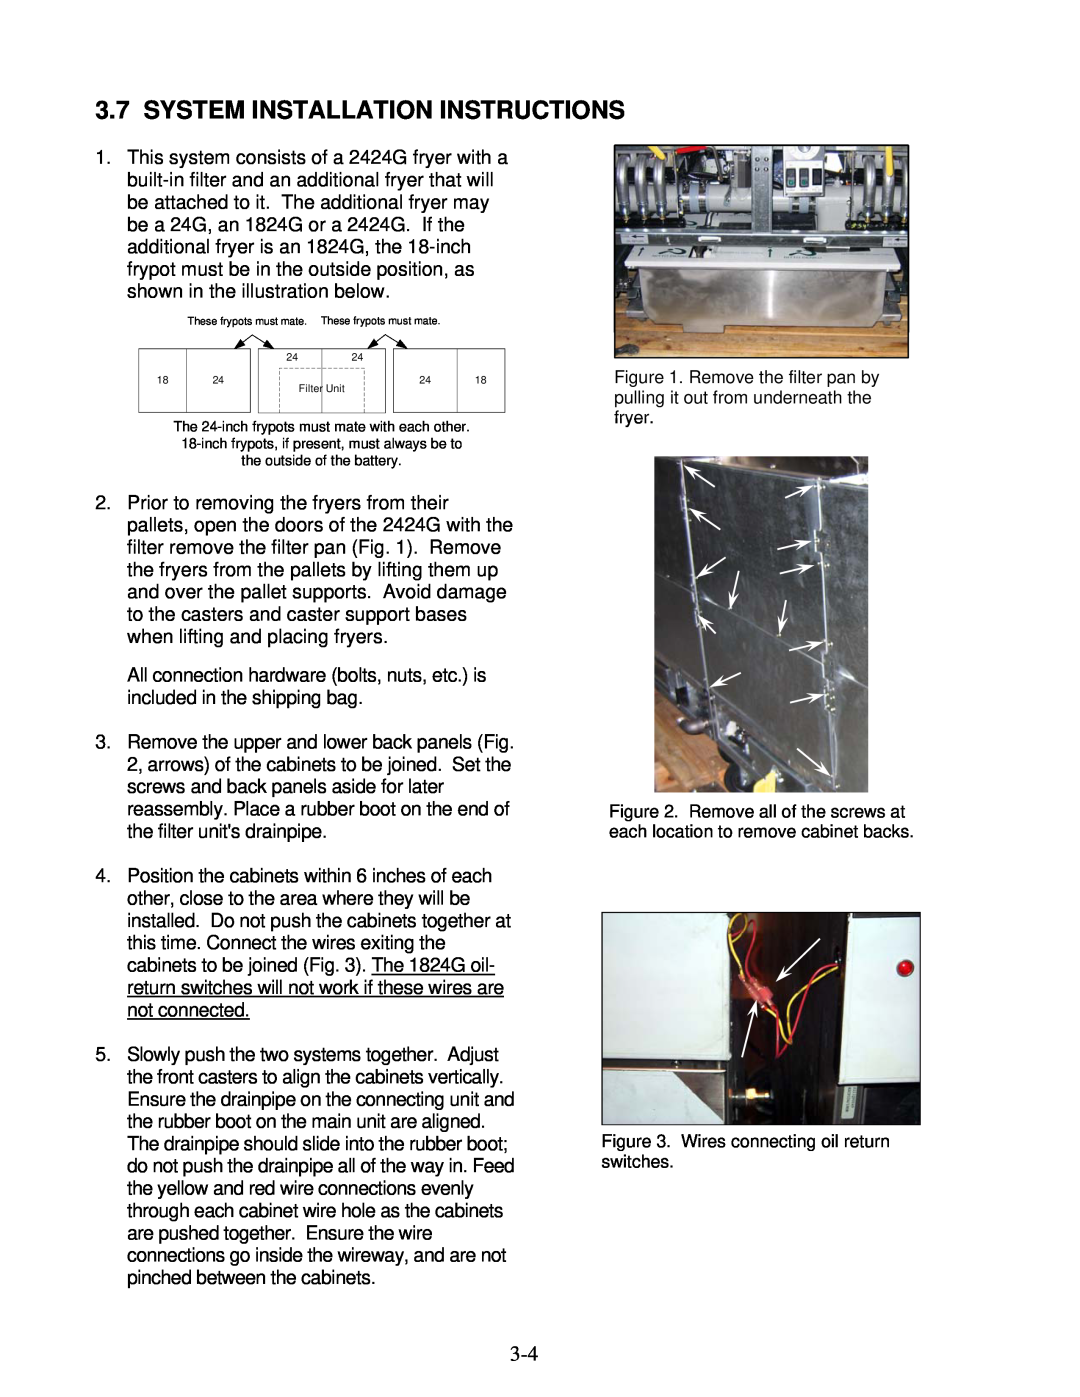 Frymaster YSCFC24 operation manual System Installation Instructions, fryer, Wires connecting oil return switches 